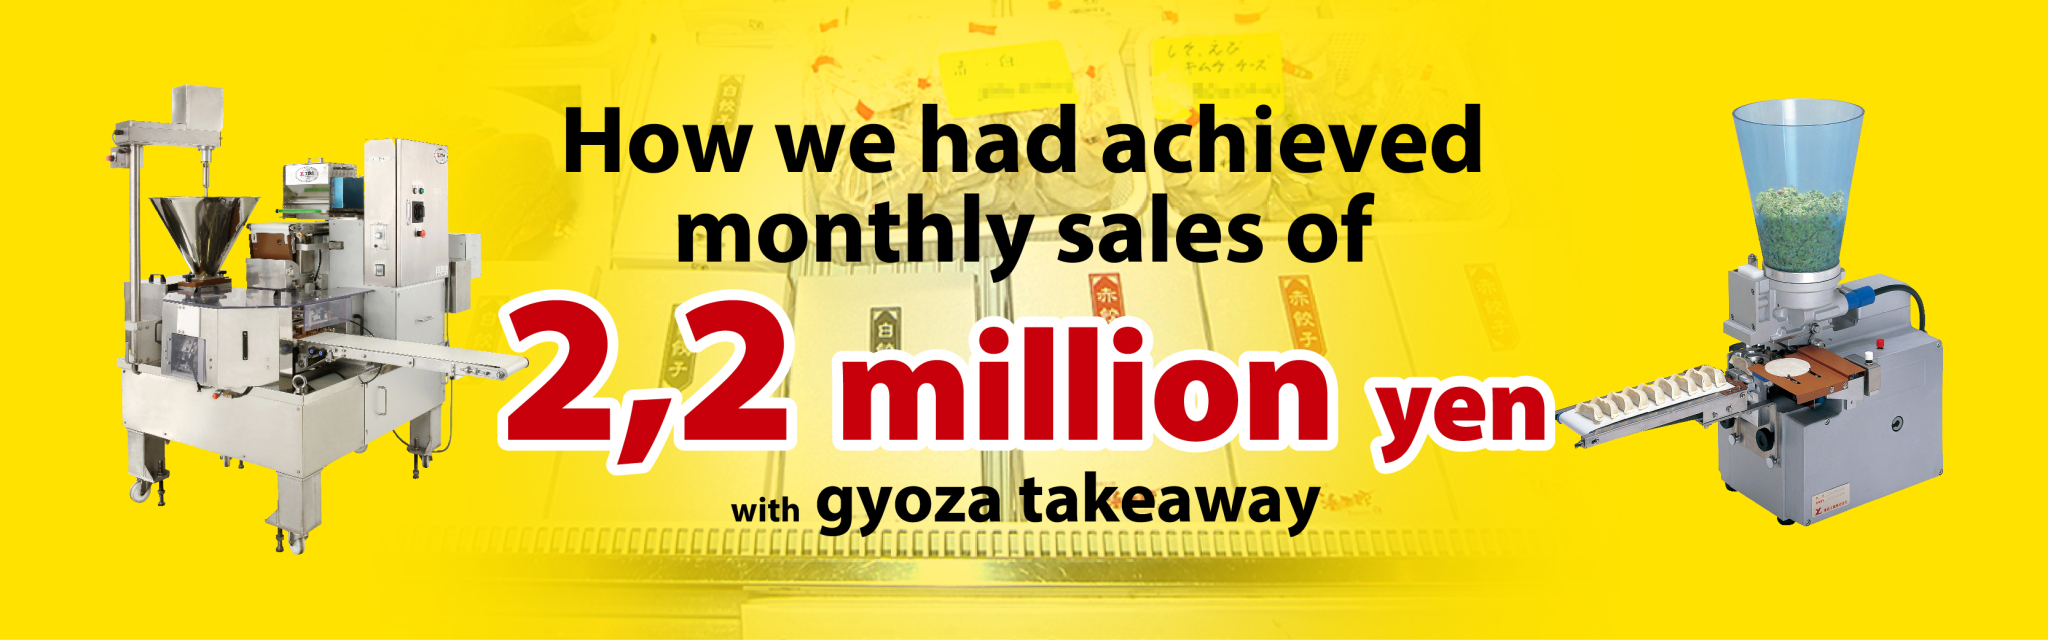 Achieved daily sales of 450,000 yen with gyoza takeaway and lunch packs (o-bento) only